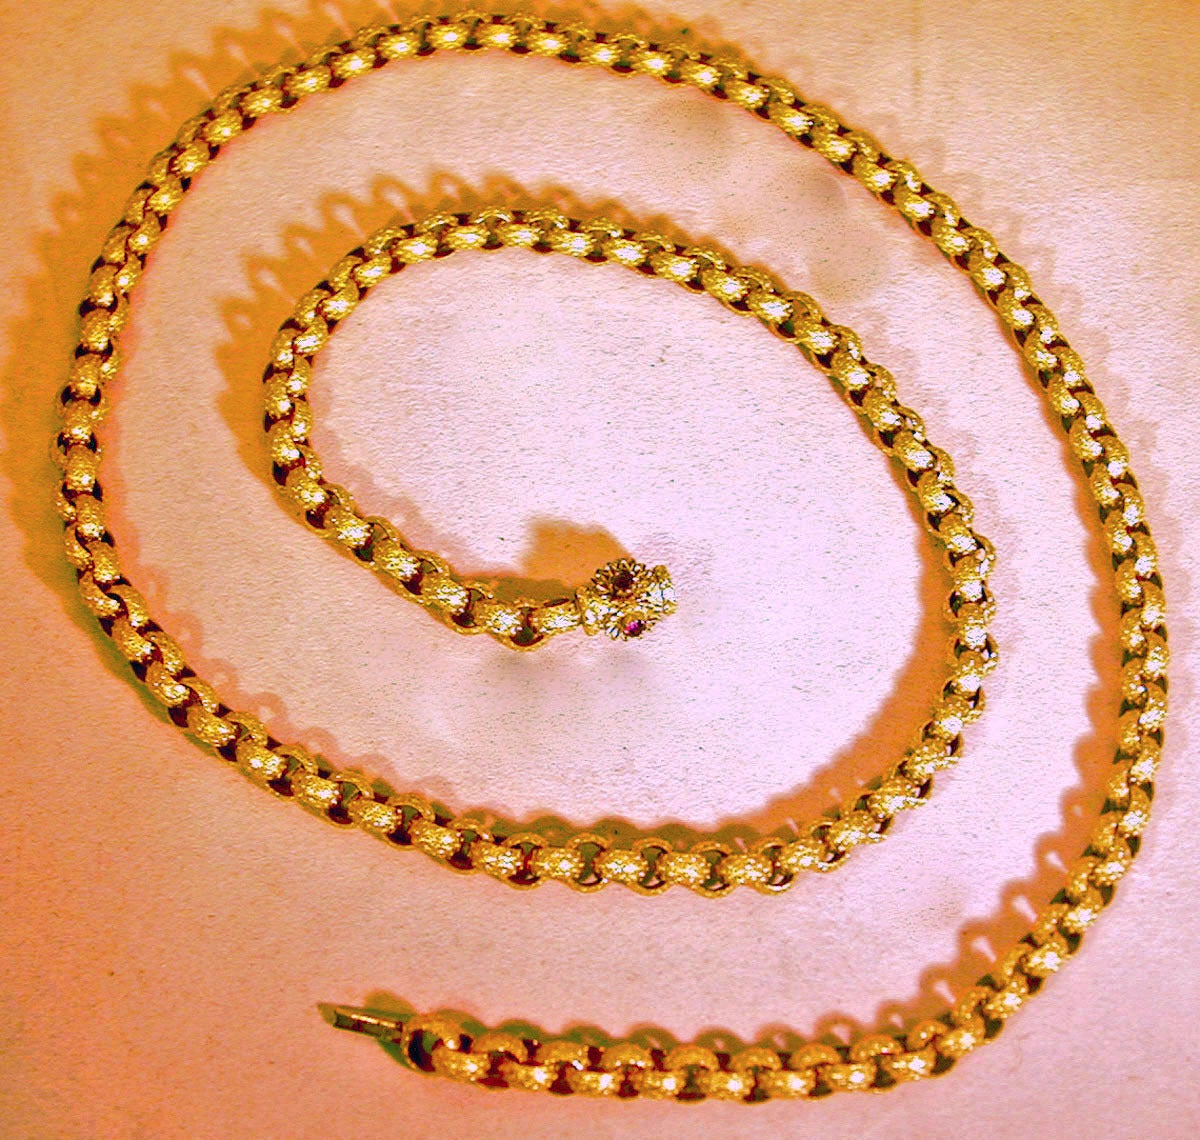 Antique Pinchbeck Muff Chain with a Barrel Clasp 3